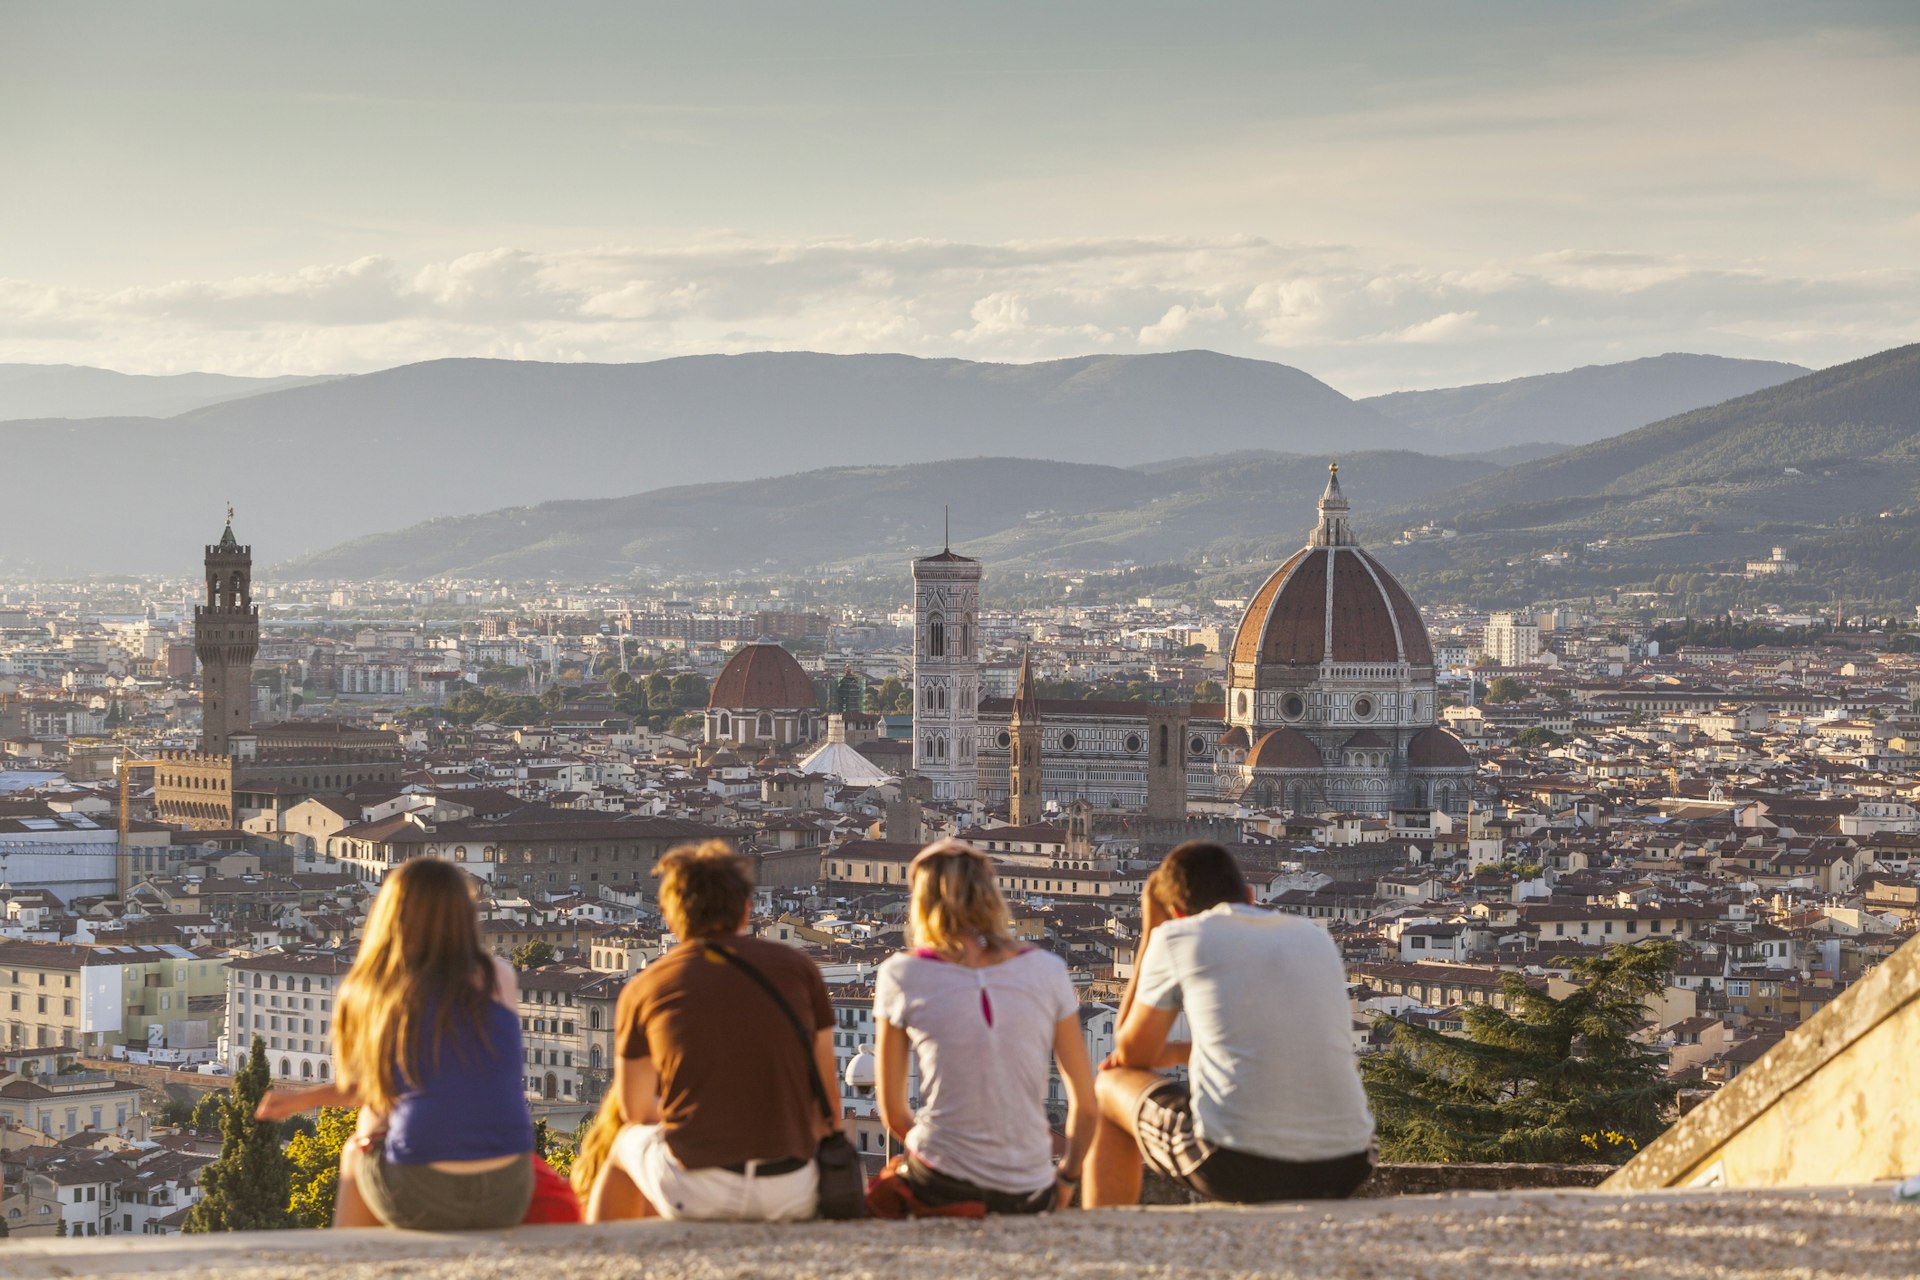 People watch the sunset from the steps of San Miniato al Monte over the city of Florence